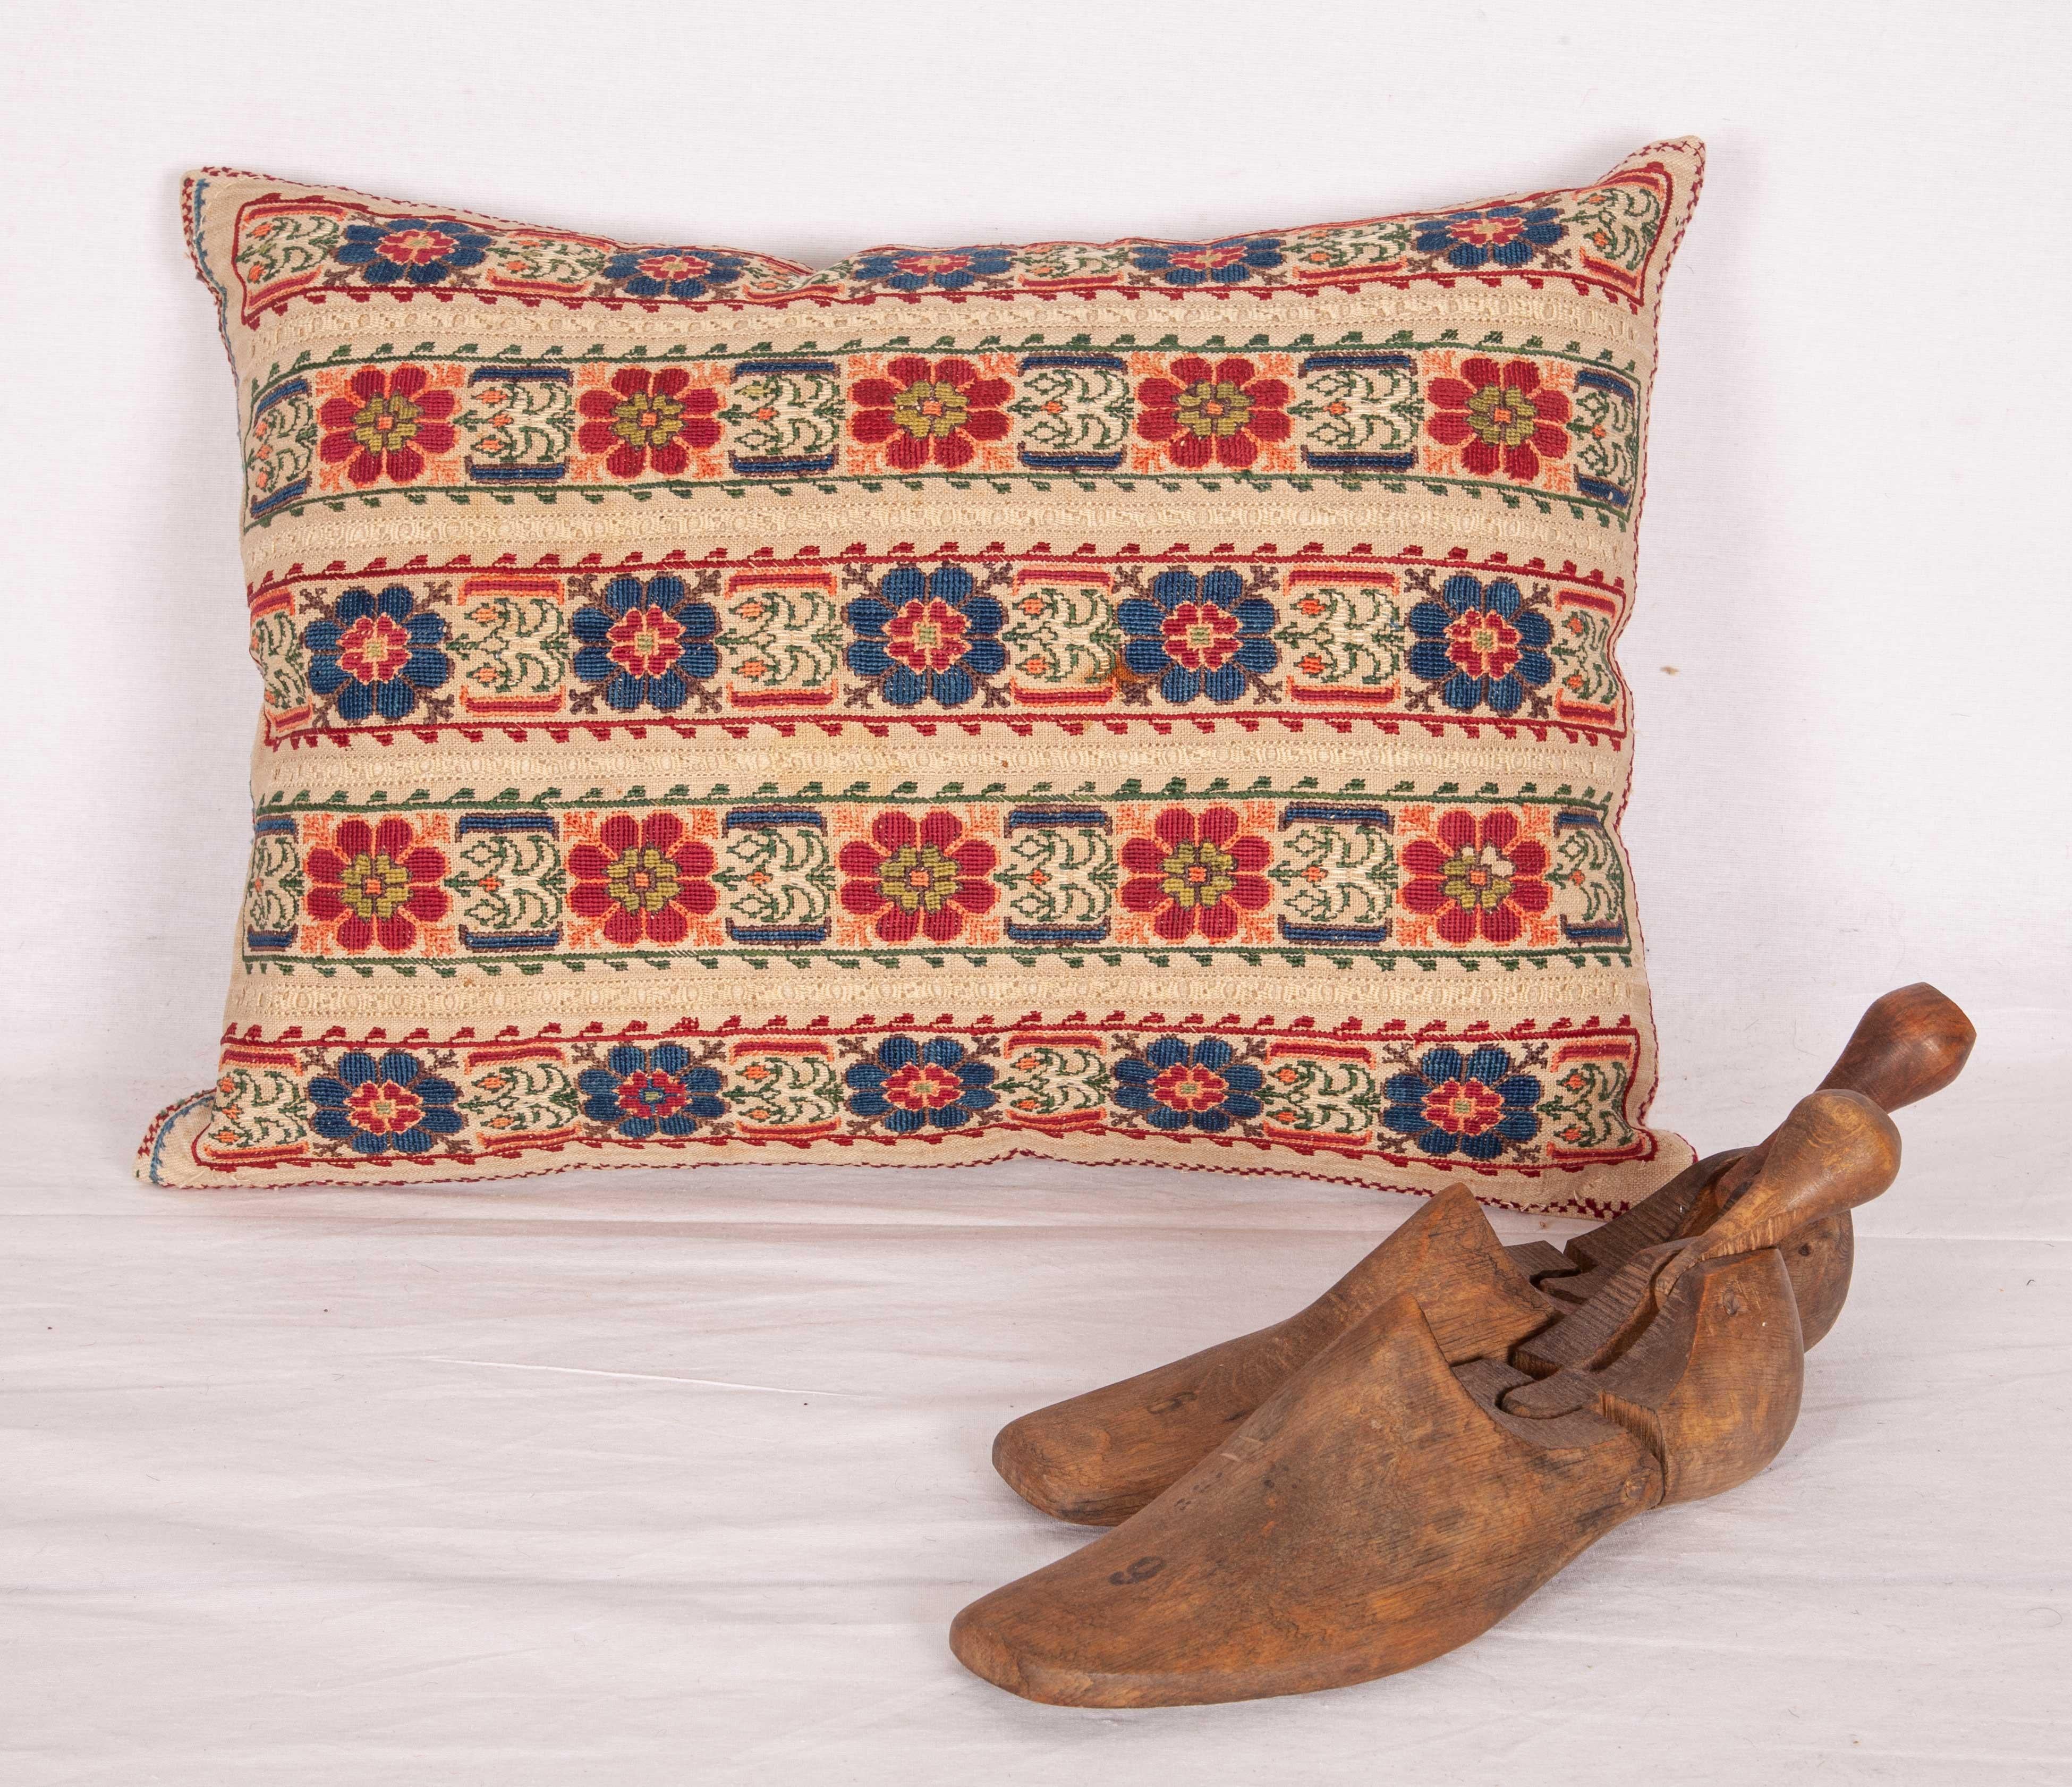 Embroidered Antique Pillow Case Fashioned from an Ottoman Greek Embroidery, 19th Century